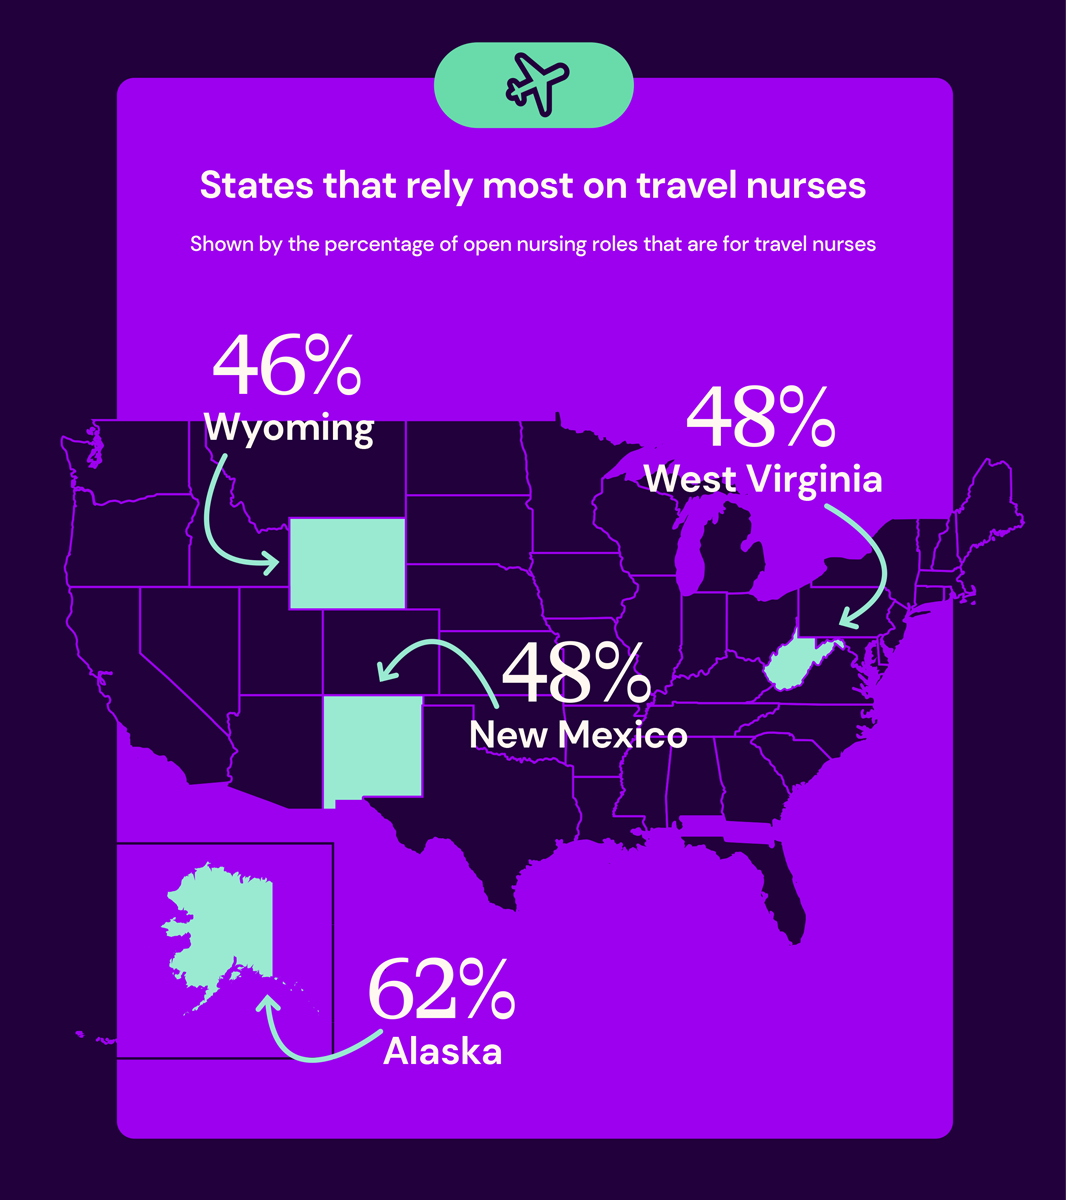 An illustrated image from an infographic about the nursing shortage in the US, showing a US map with four highlighted states that rely most on travel nurses, each with the percentage of open nursing roles that are for travel nurses: Wyoming 46%, West Virginia 48%, New Mexico 48%, and Alaska 62%.